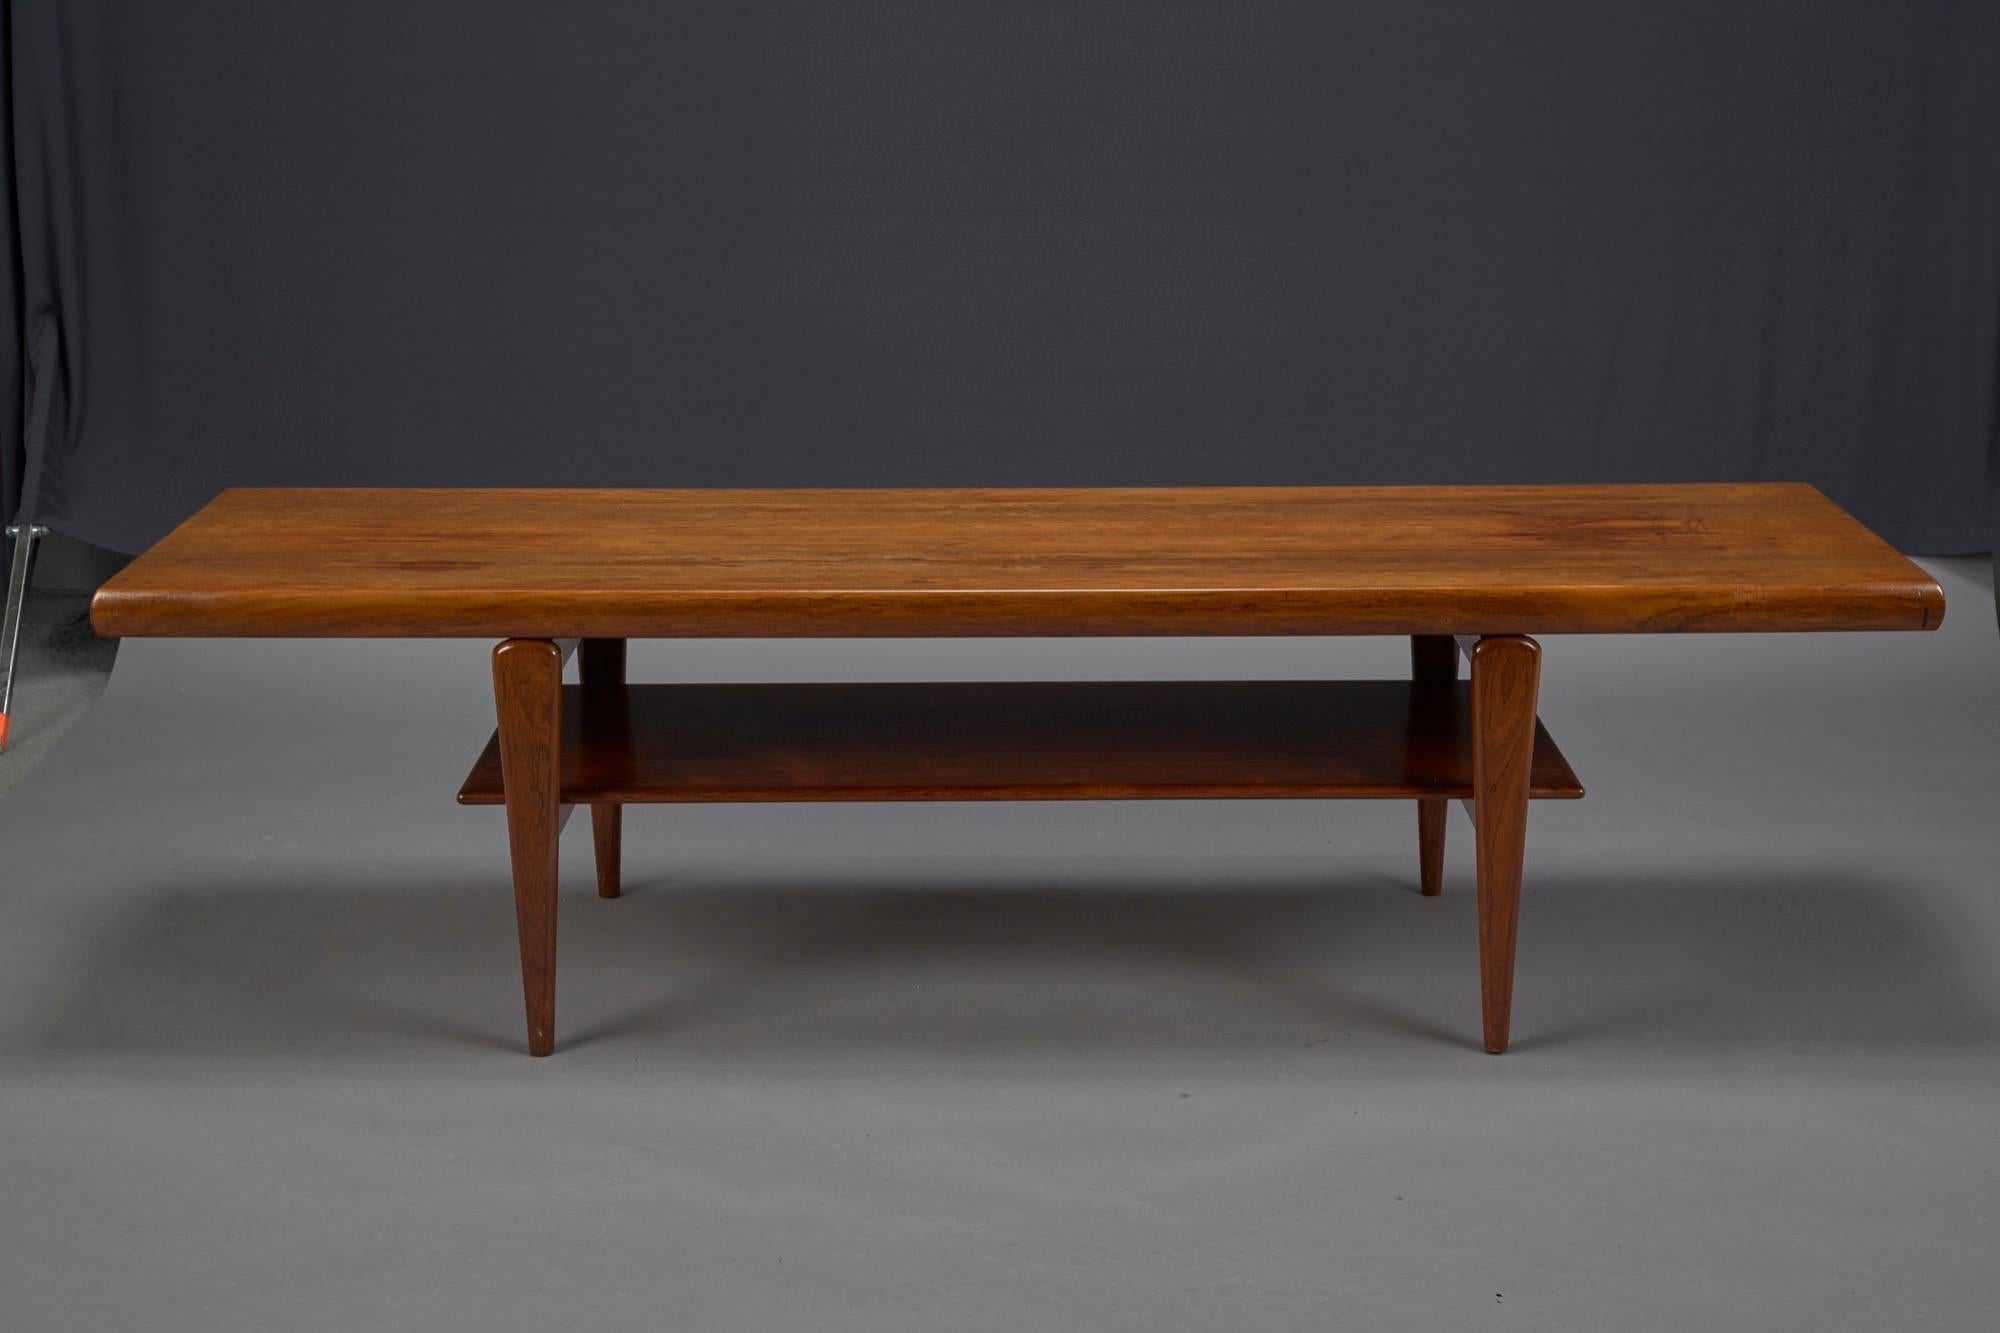 Beautiful Danish modern rosewood coffee table with shelf by Gern Møbelfabrik, Denmark. Excellent condition.